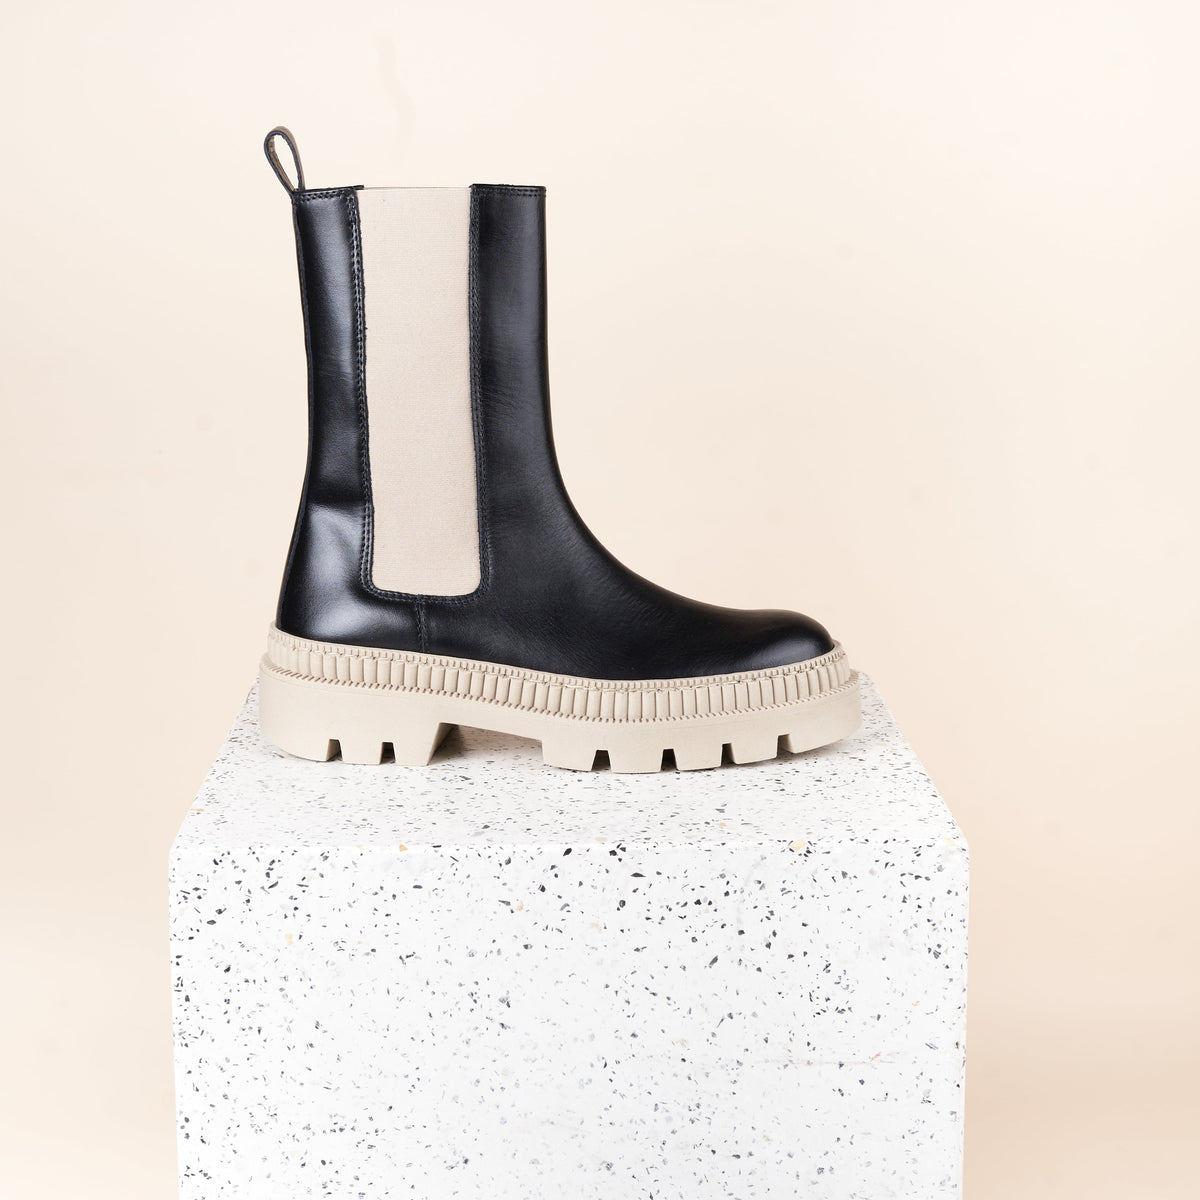 Monza Tall - Black Calf Leather/Sand (Final sale with code BFCM)